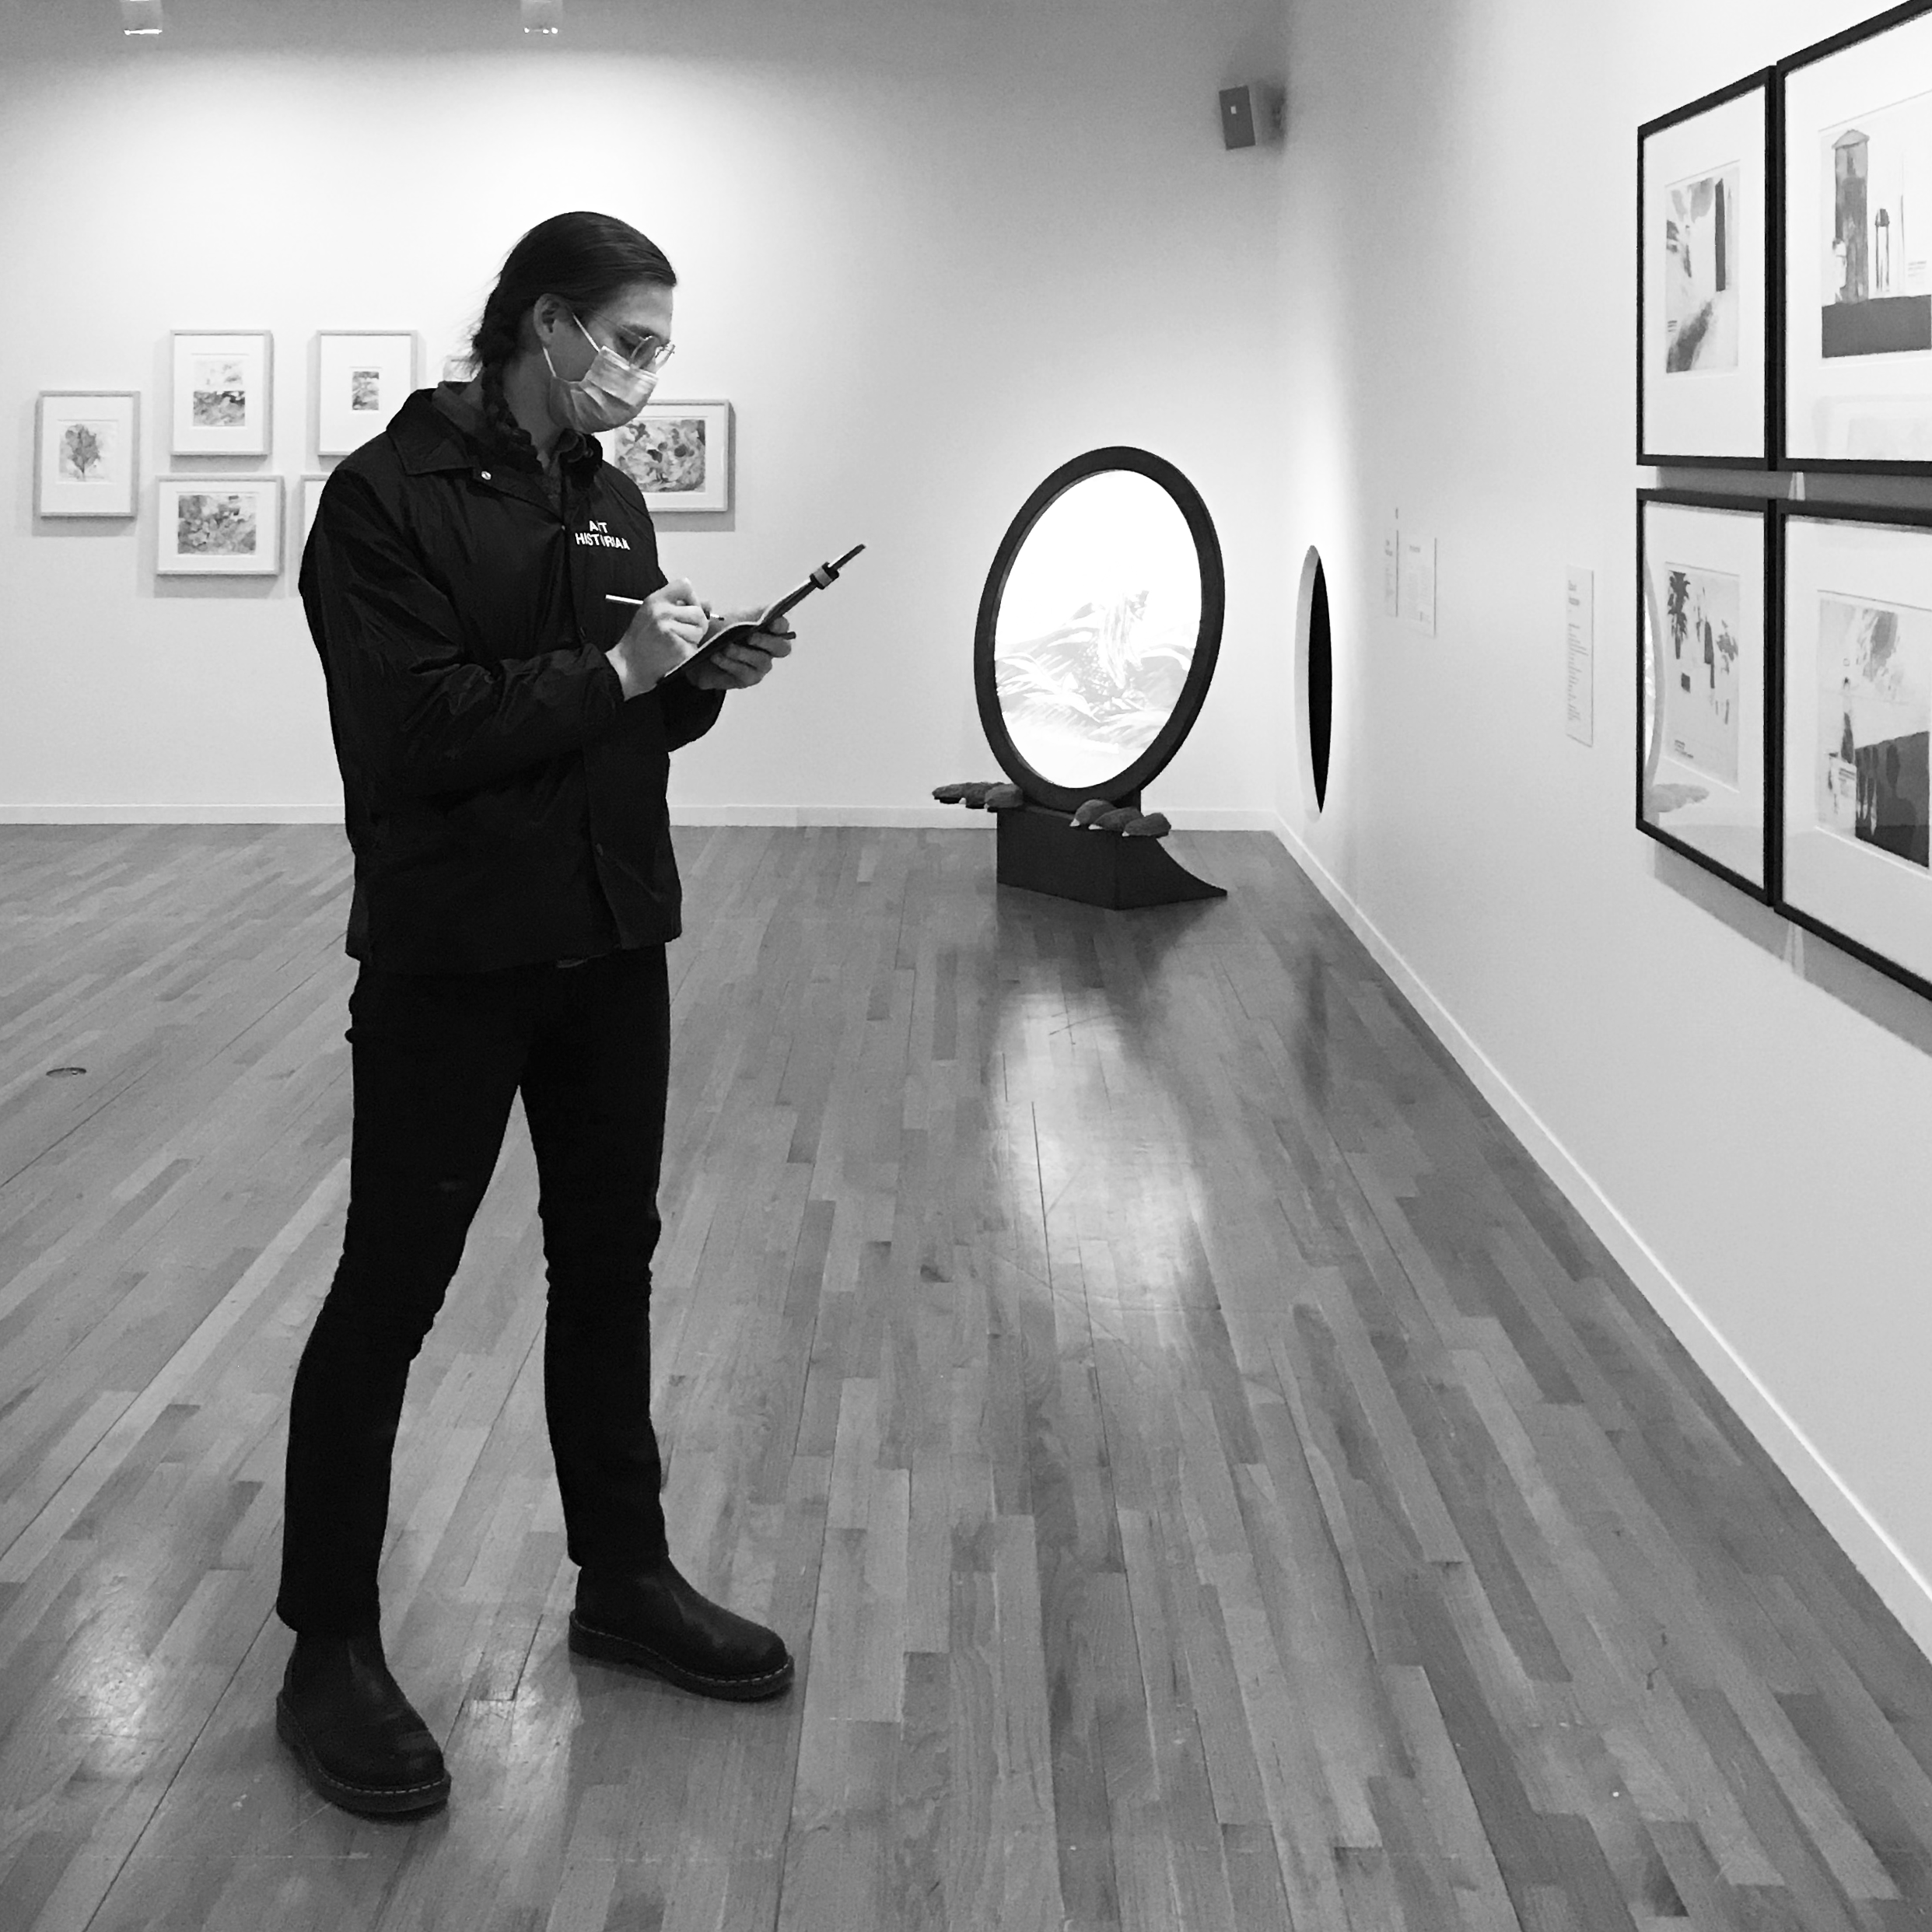 From the side: me wearing the jacket and writing in a police-style notepad, while facing a series of drawings on a gallery wall.